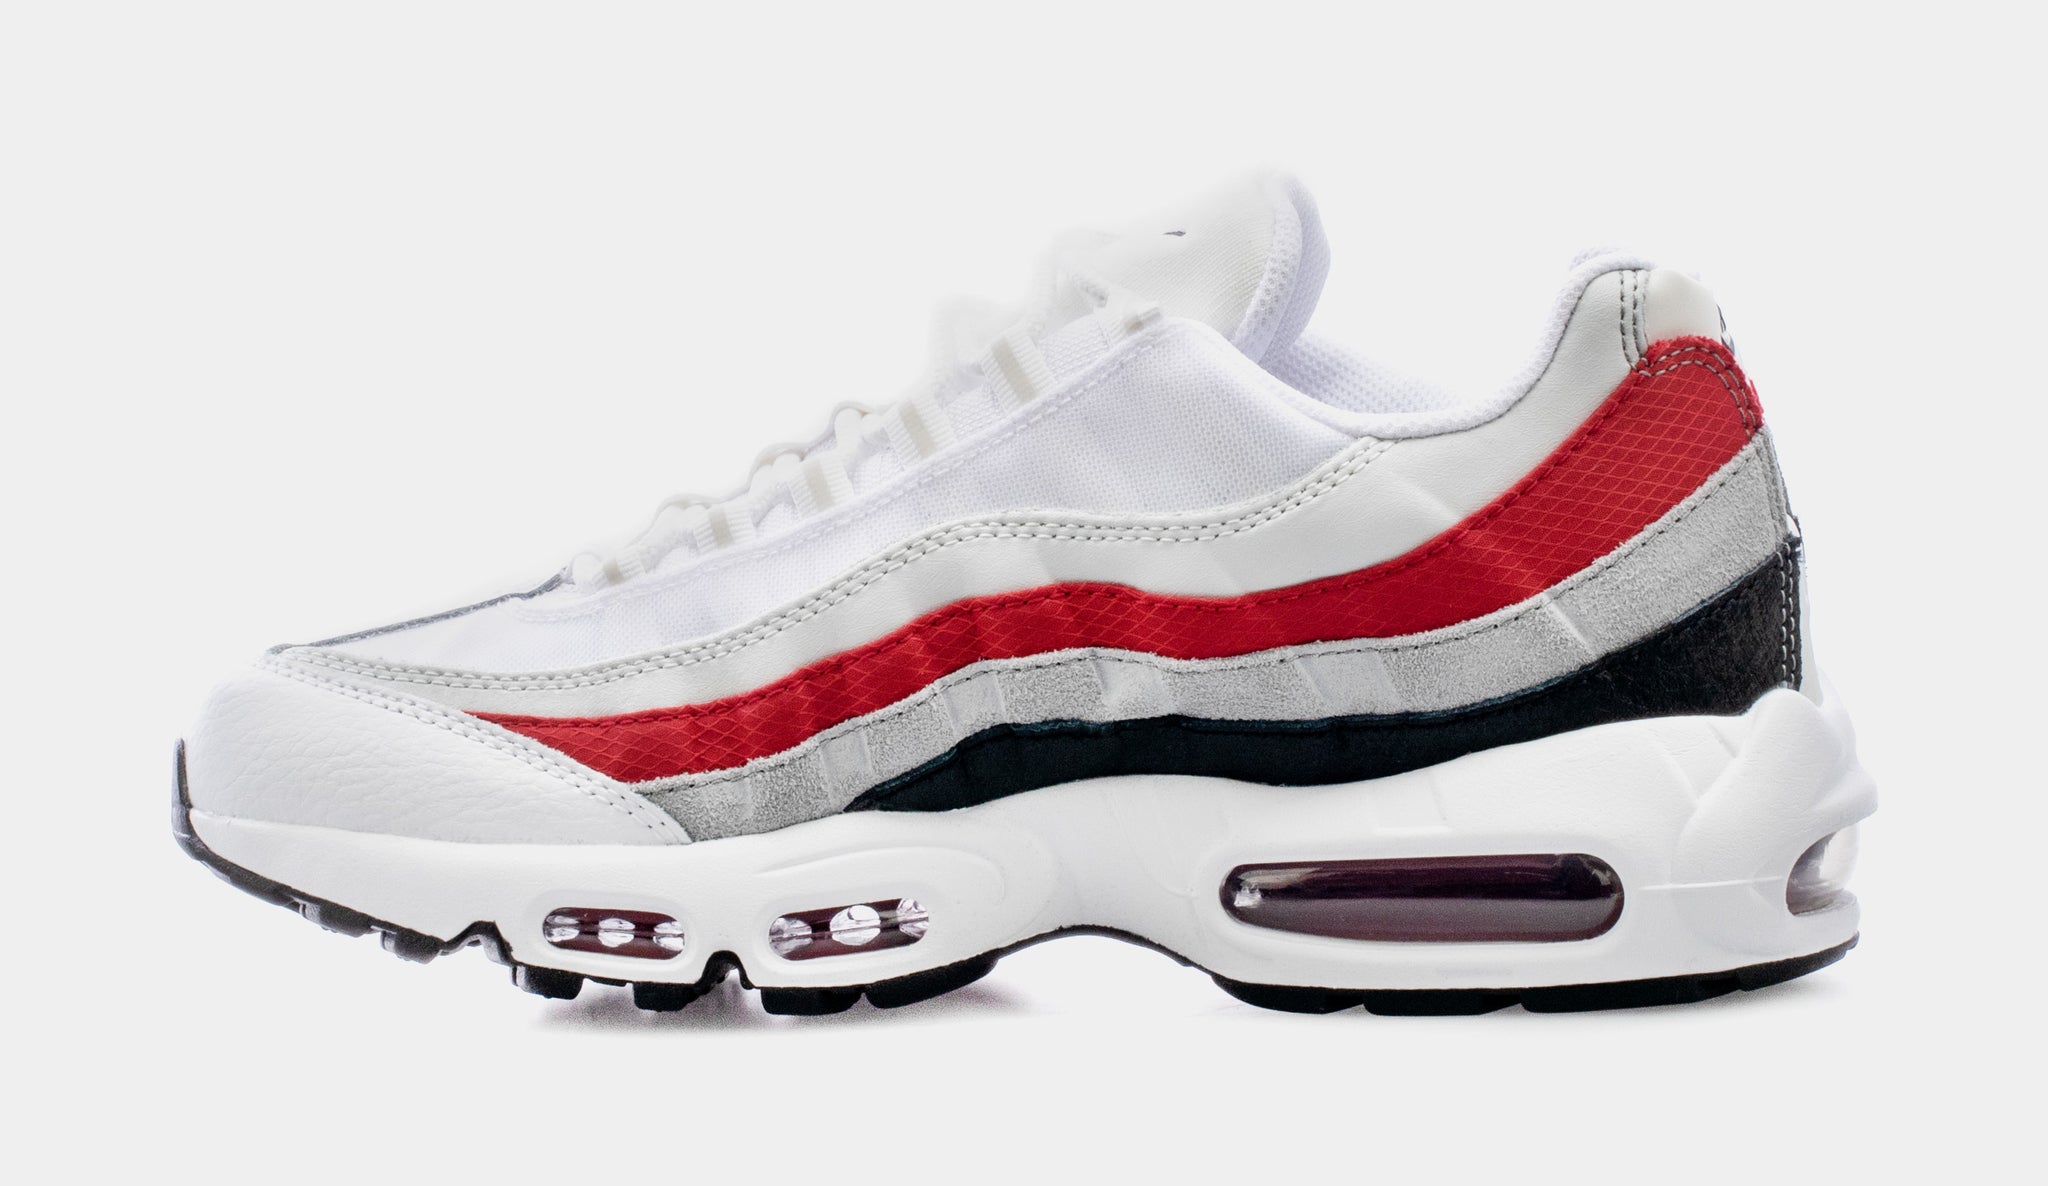 Air Max 95 Essential Mens Running Shoes (White/Red)